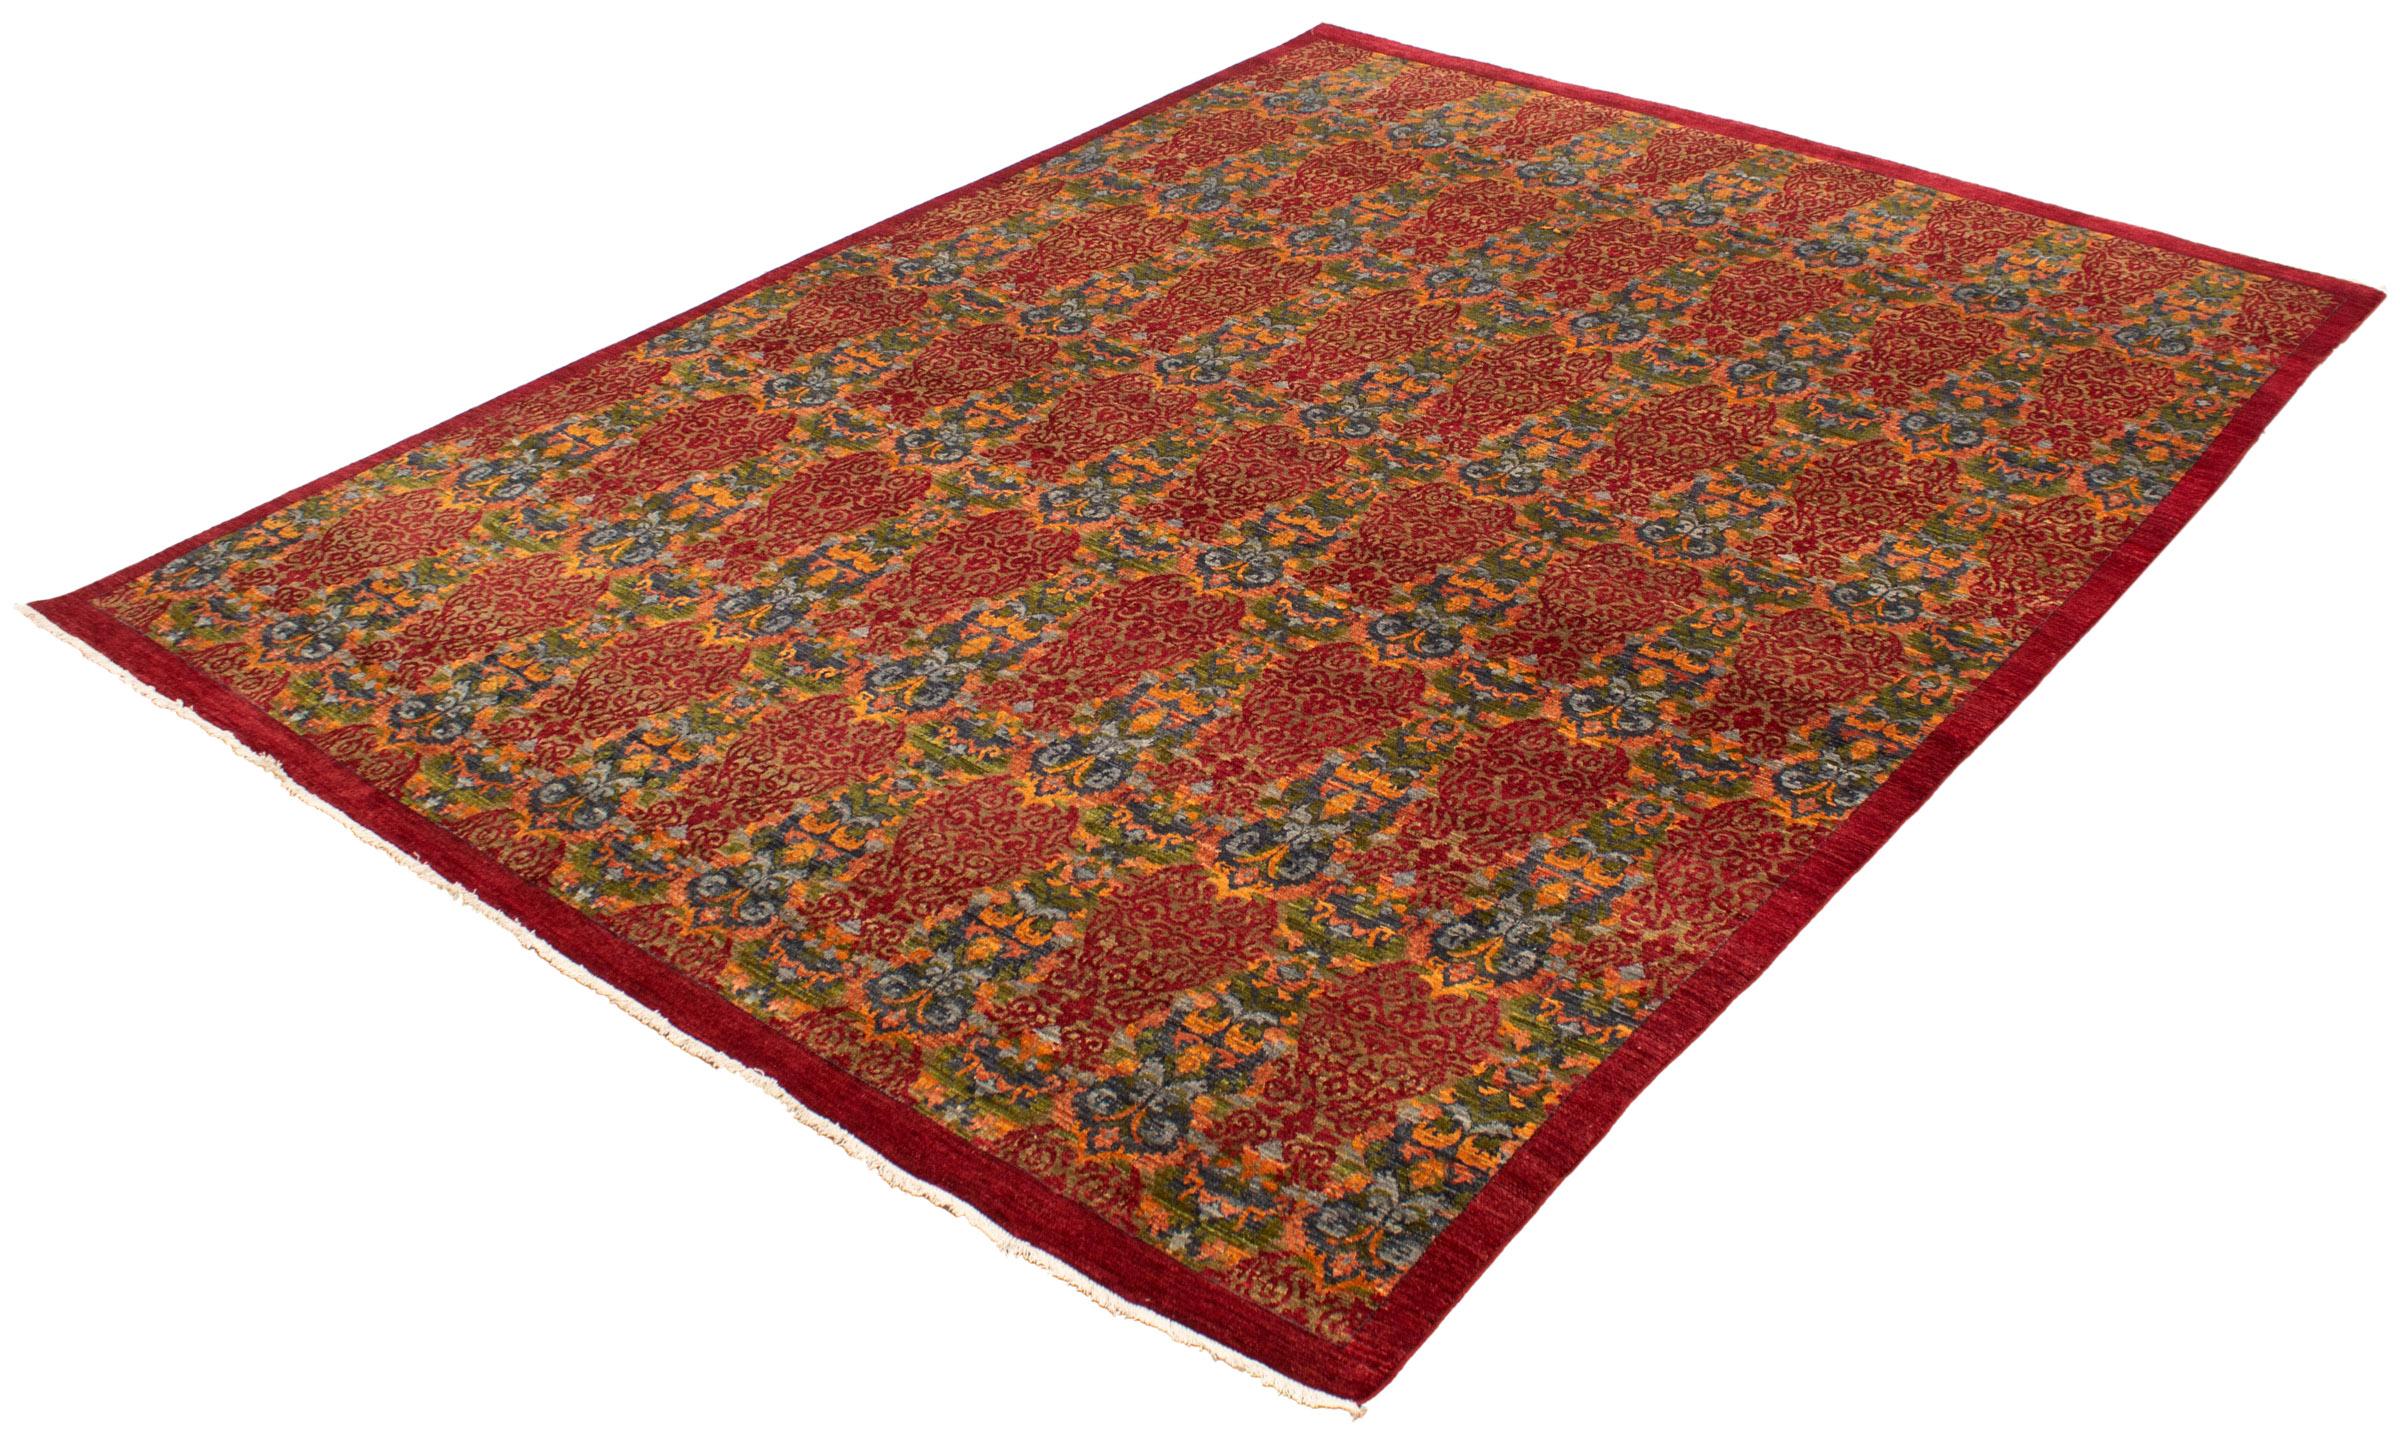 Persian Hand-Knotted Wool, Red Lahore Carpet, 10’ x 14’ For Sale